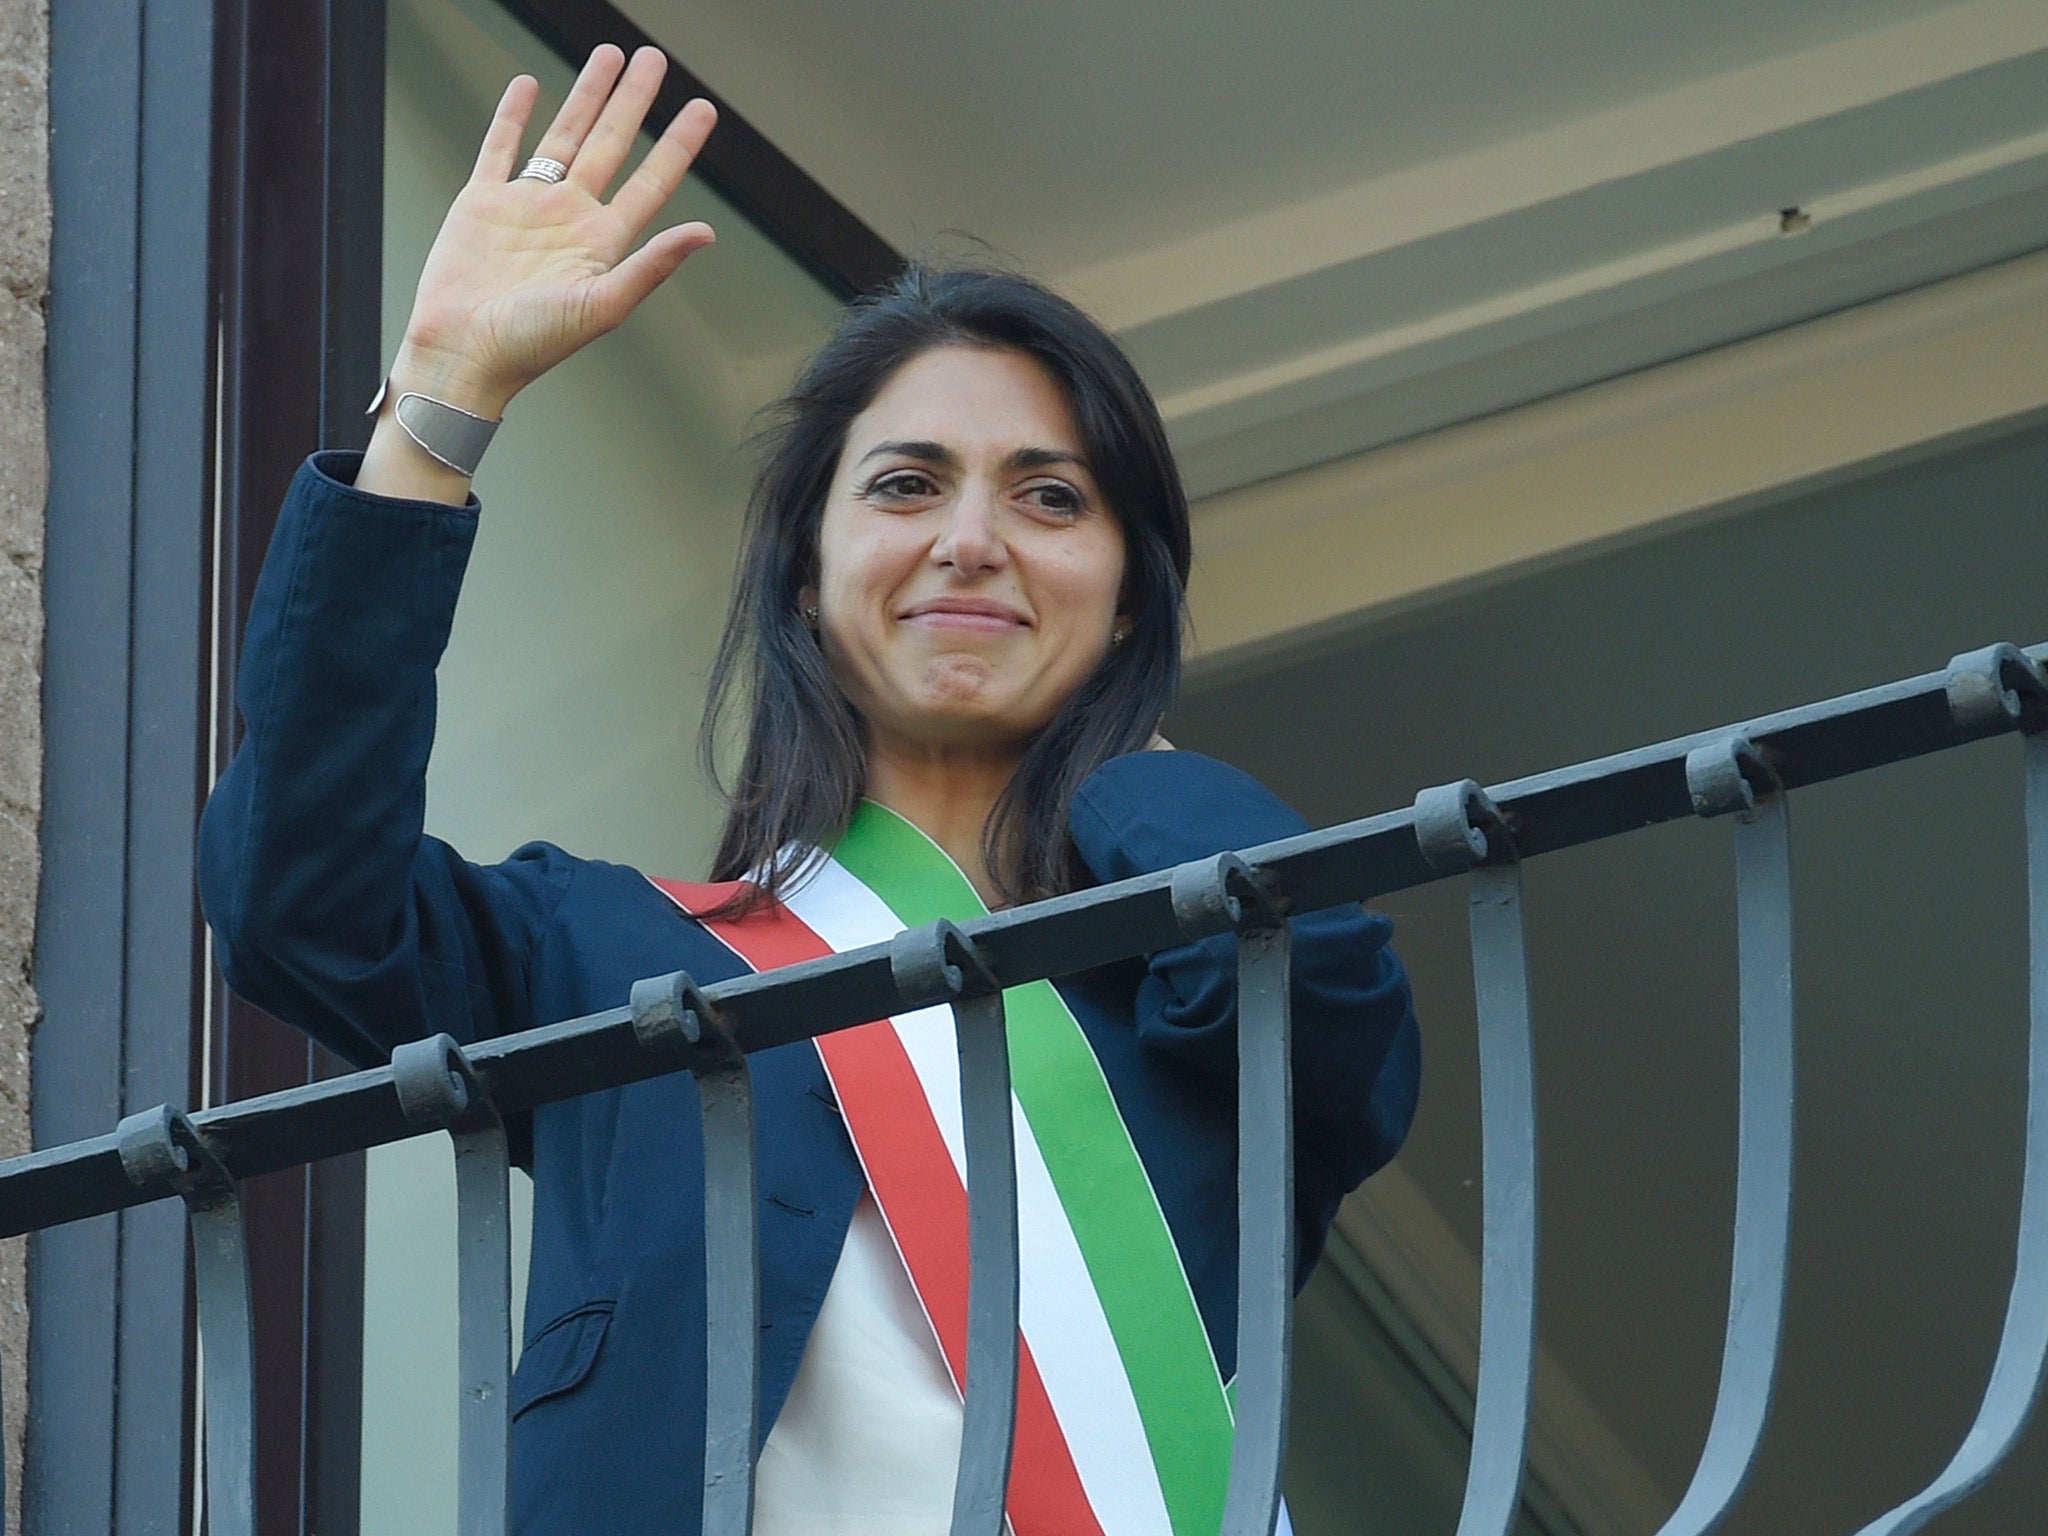 Virgina Raggi was elected as Rome Mayor in June this year